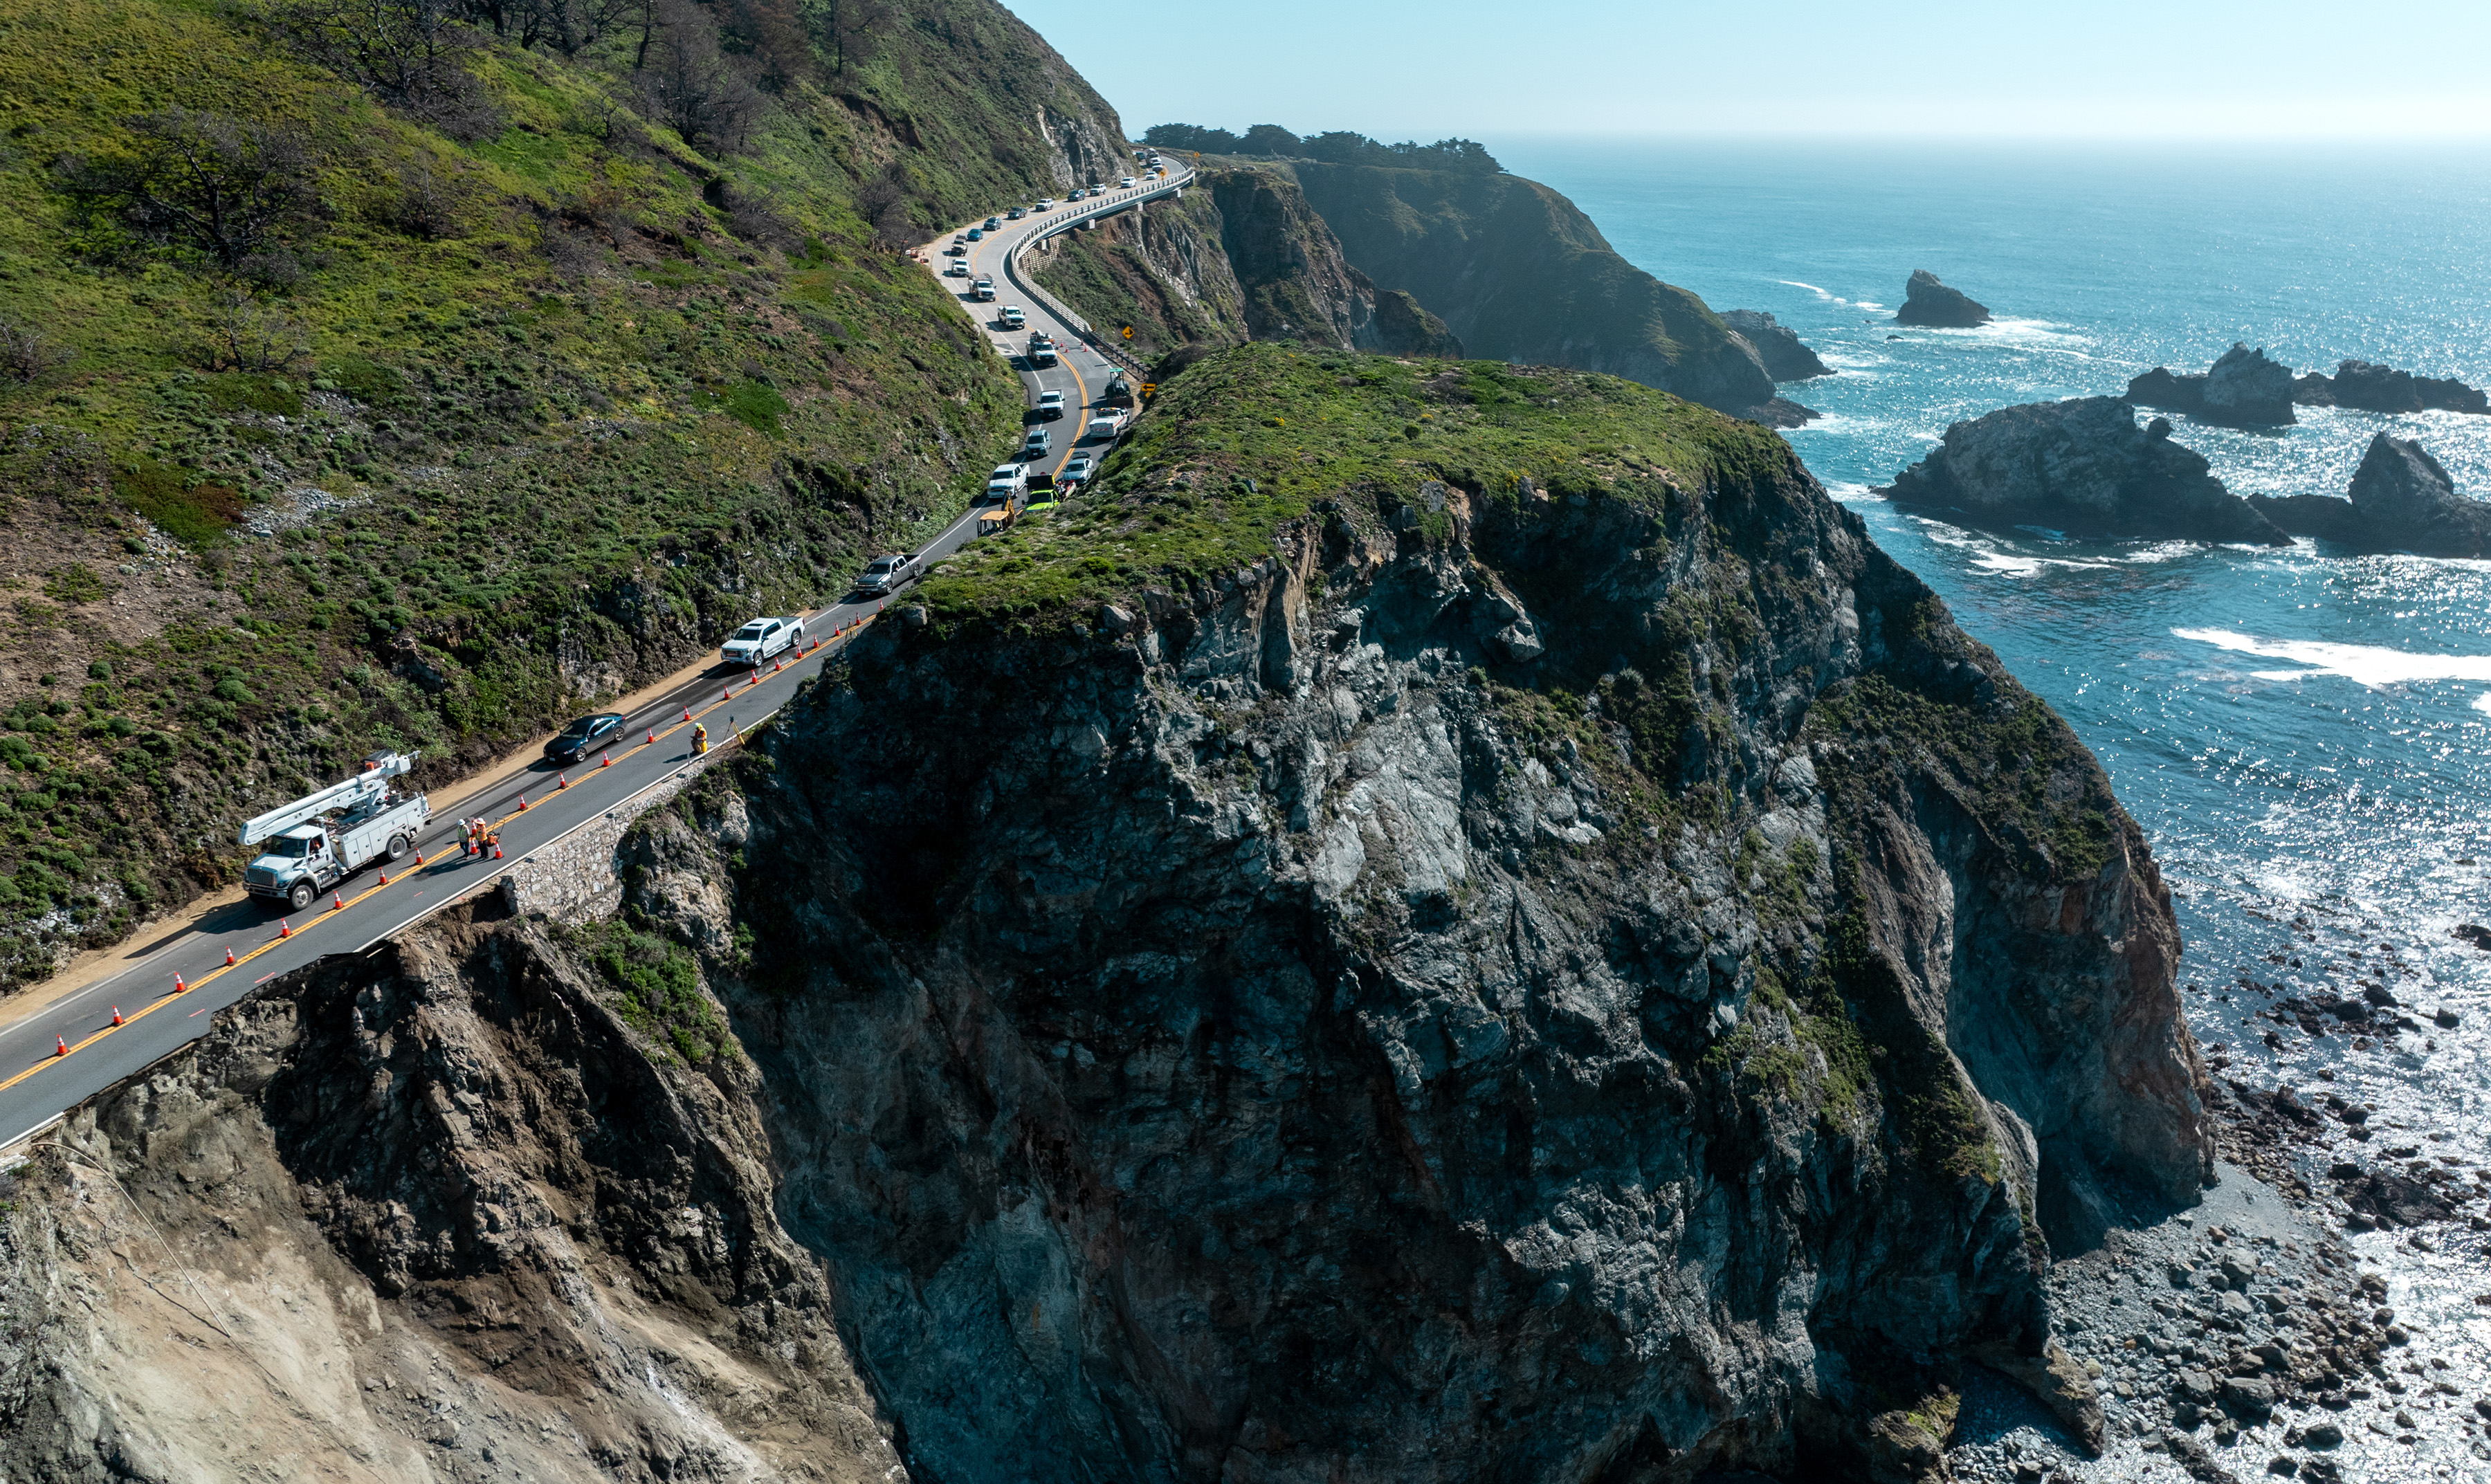 A winding coastal road hugs a steep cliffside above a rocky shoreline, with the ocean in the background.